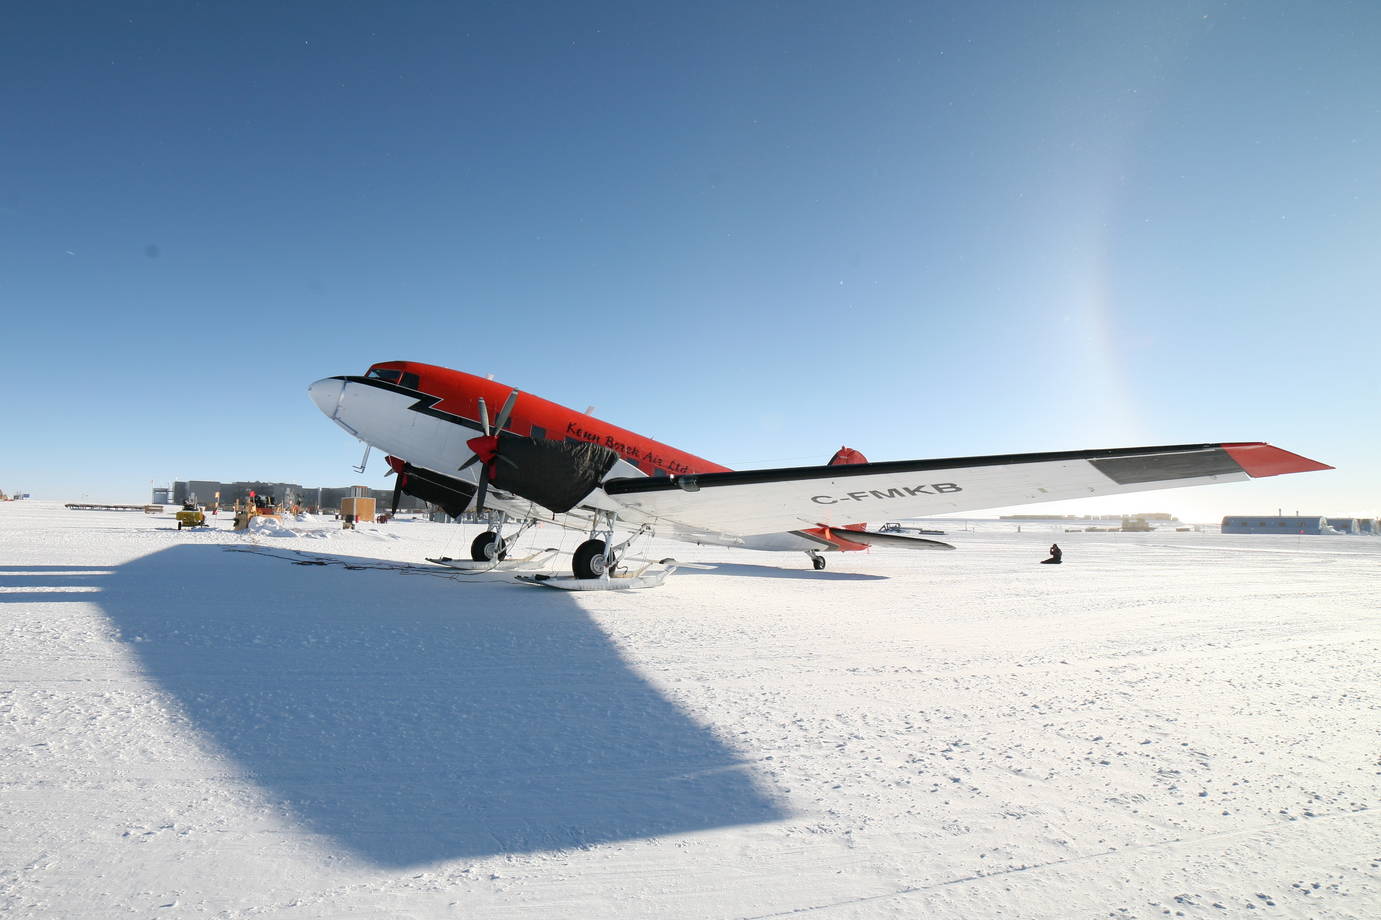 A Basler aircraft parked in front of the south pole station.